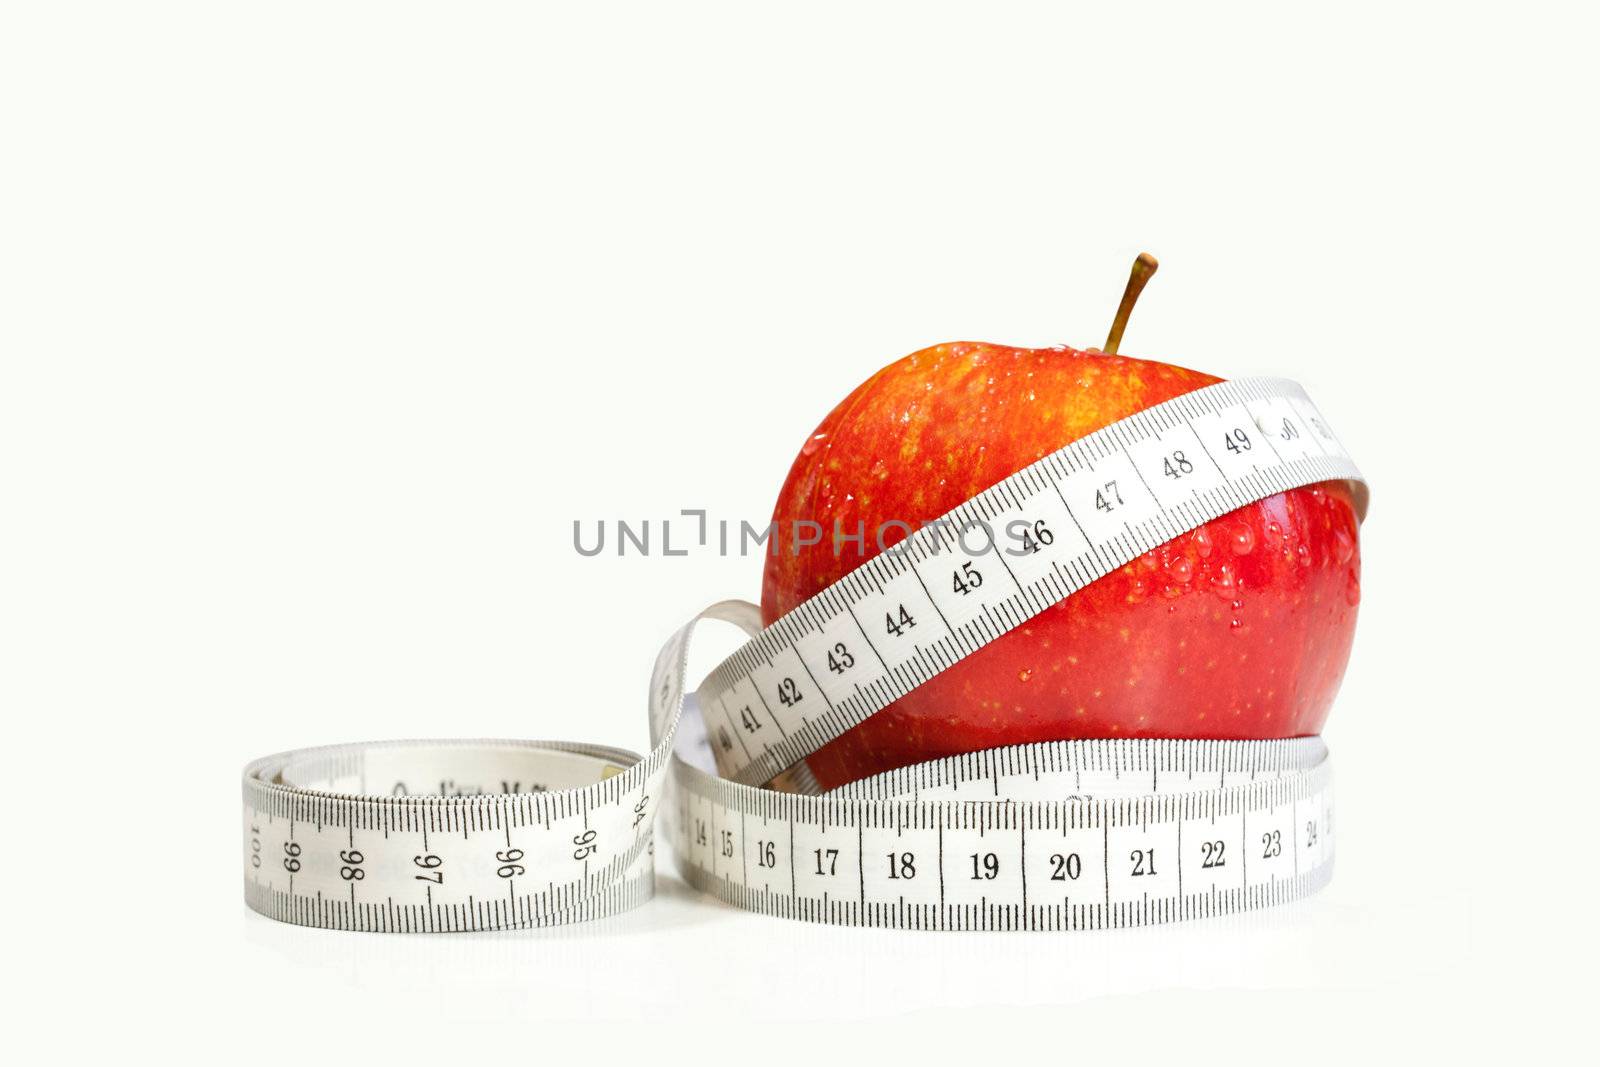 Red apple with tape measure by Bestpictures